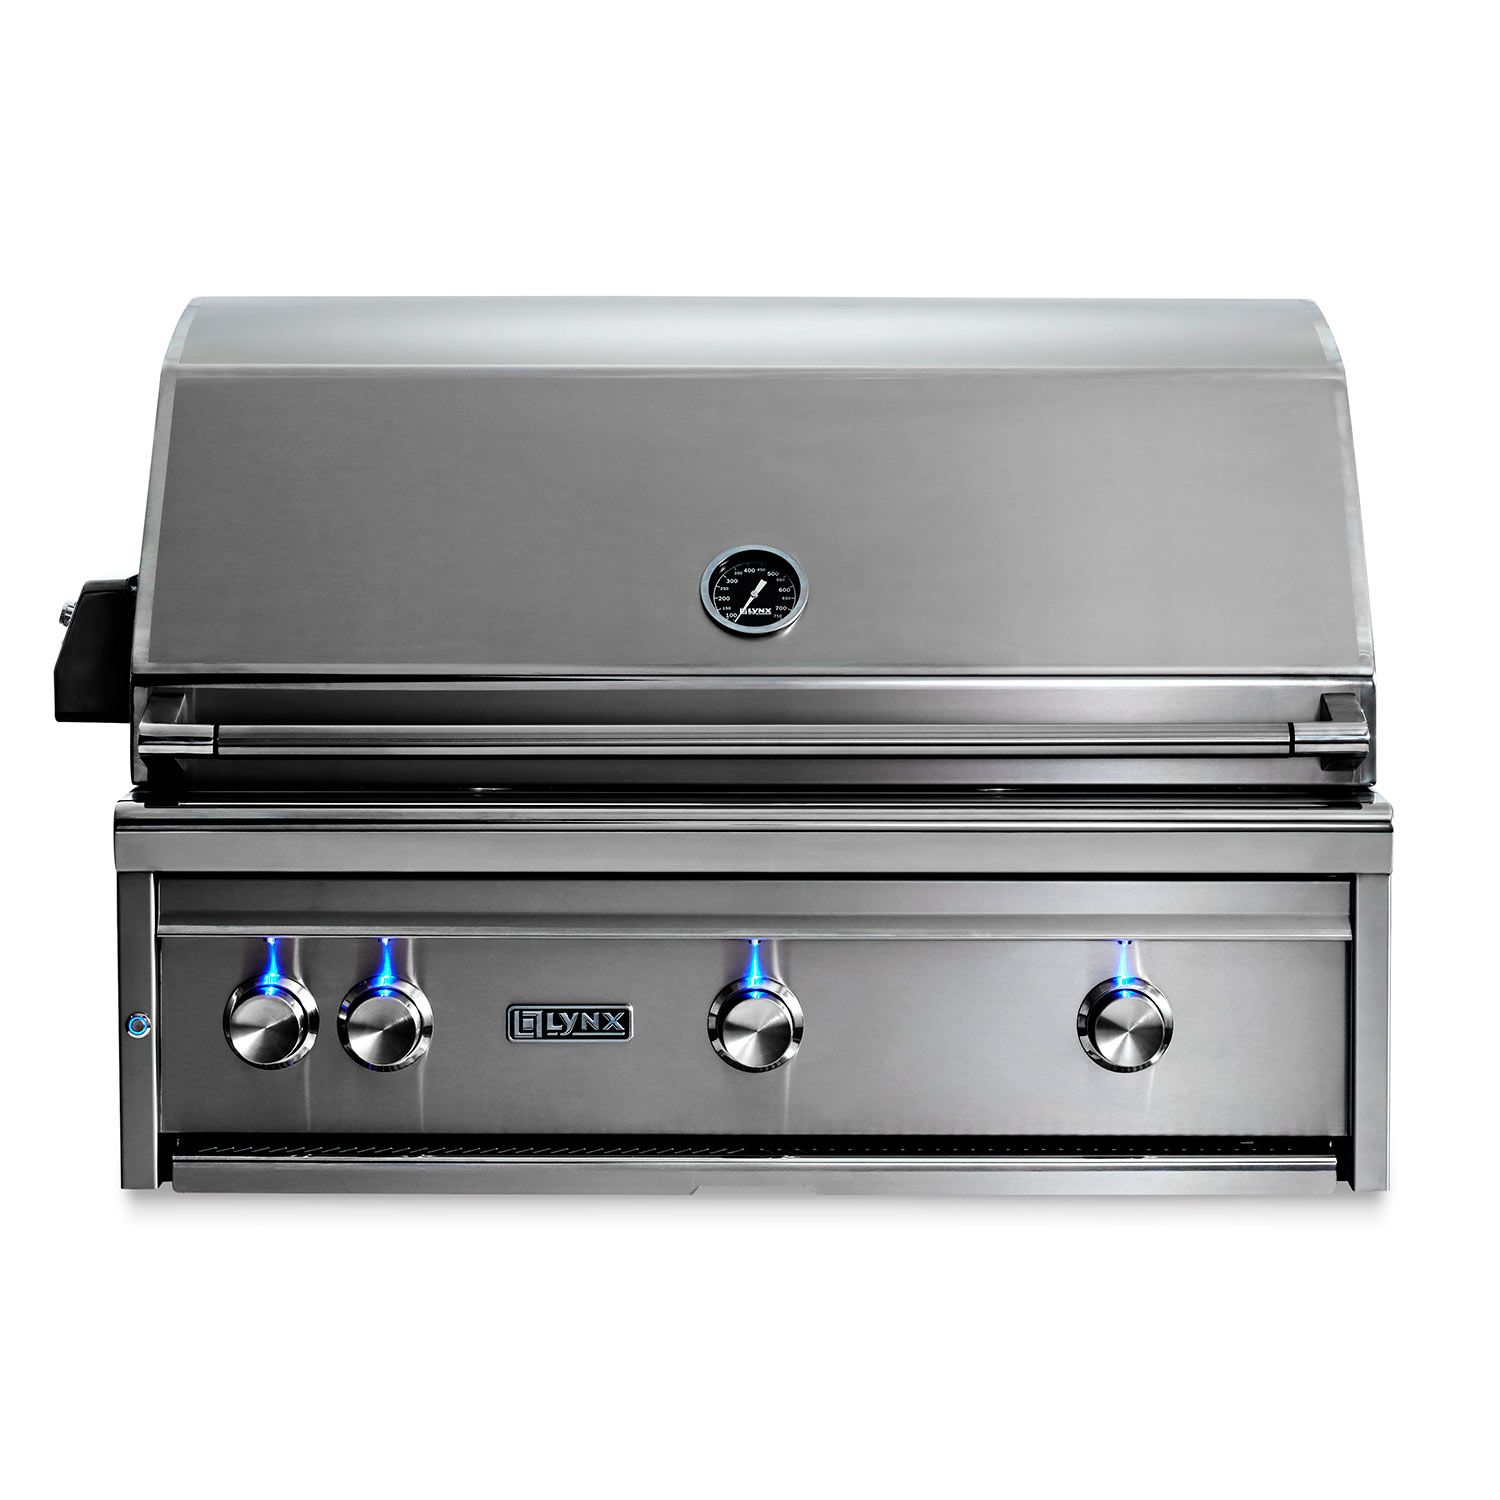 Lynx Professional 36" Built-in All Trident Sear Burner Propane Gas Grill with Rotisserie - L36ATR New 2018 Model